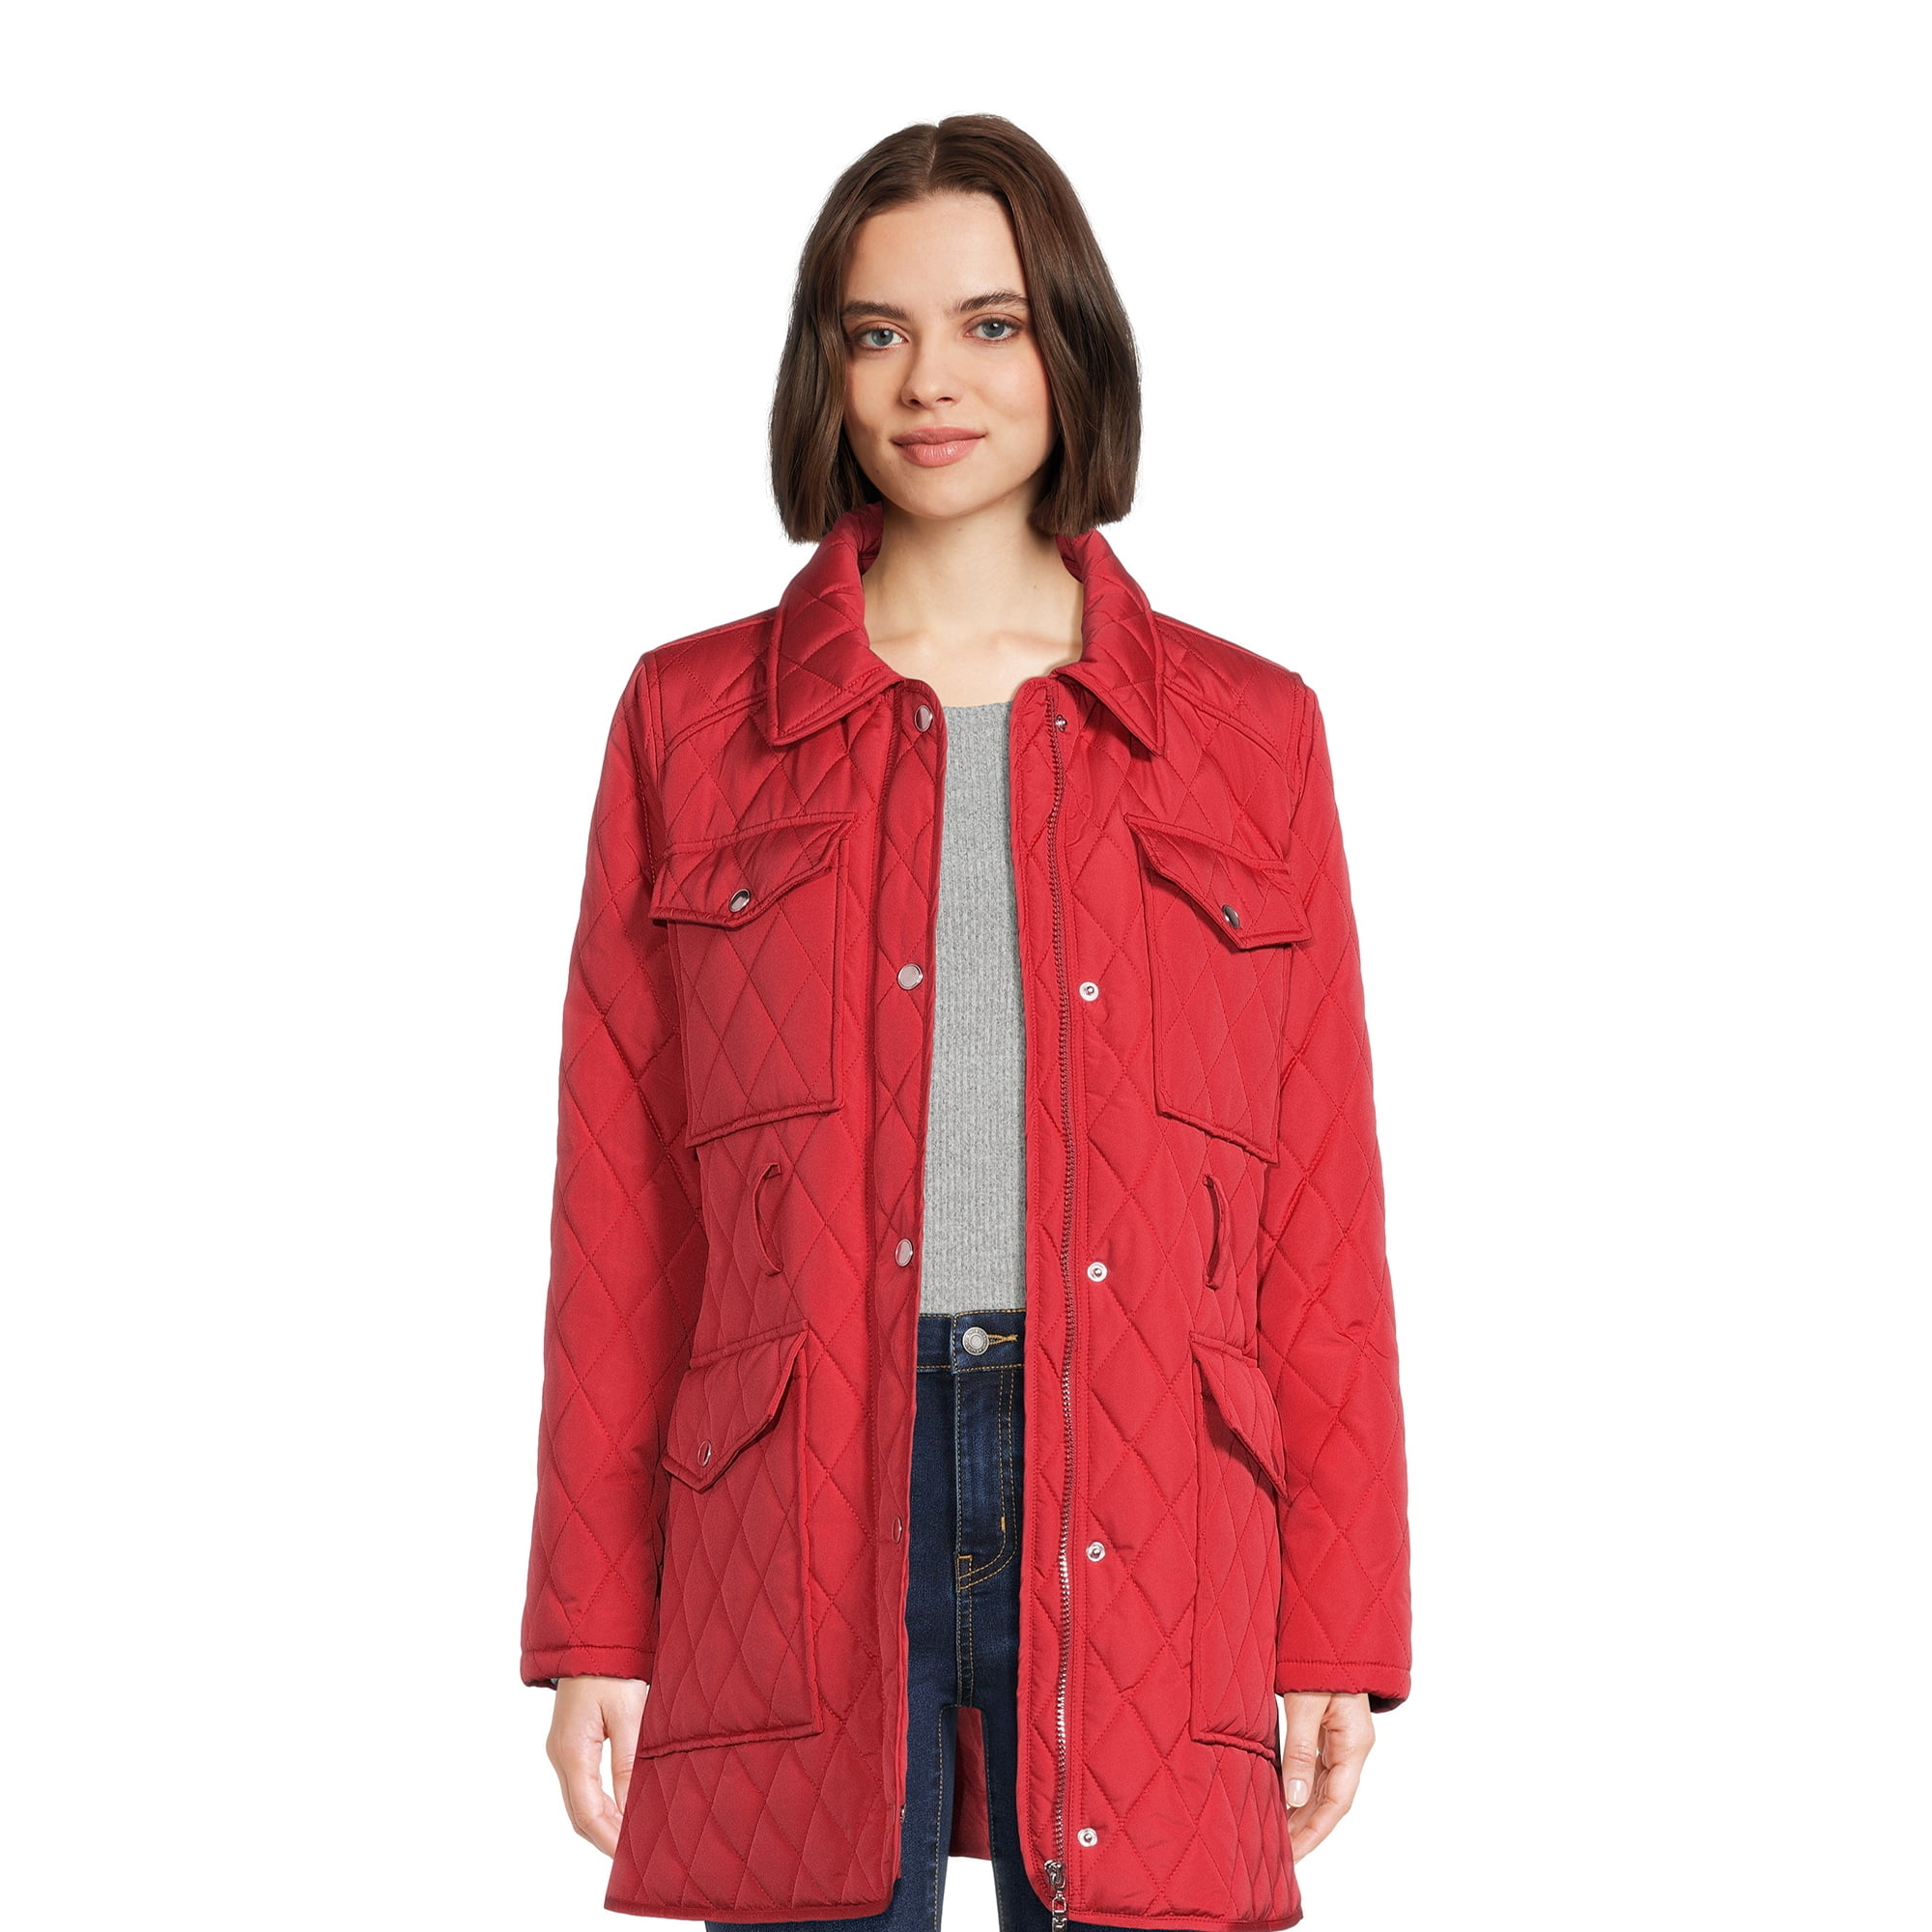 a model wearing the jacket in red, opened